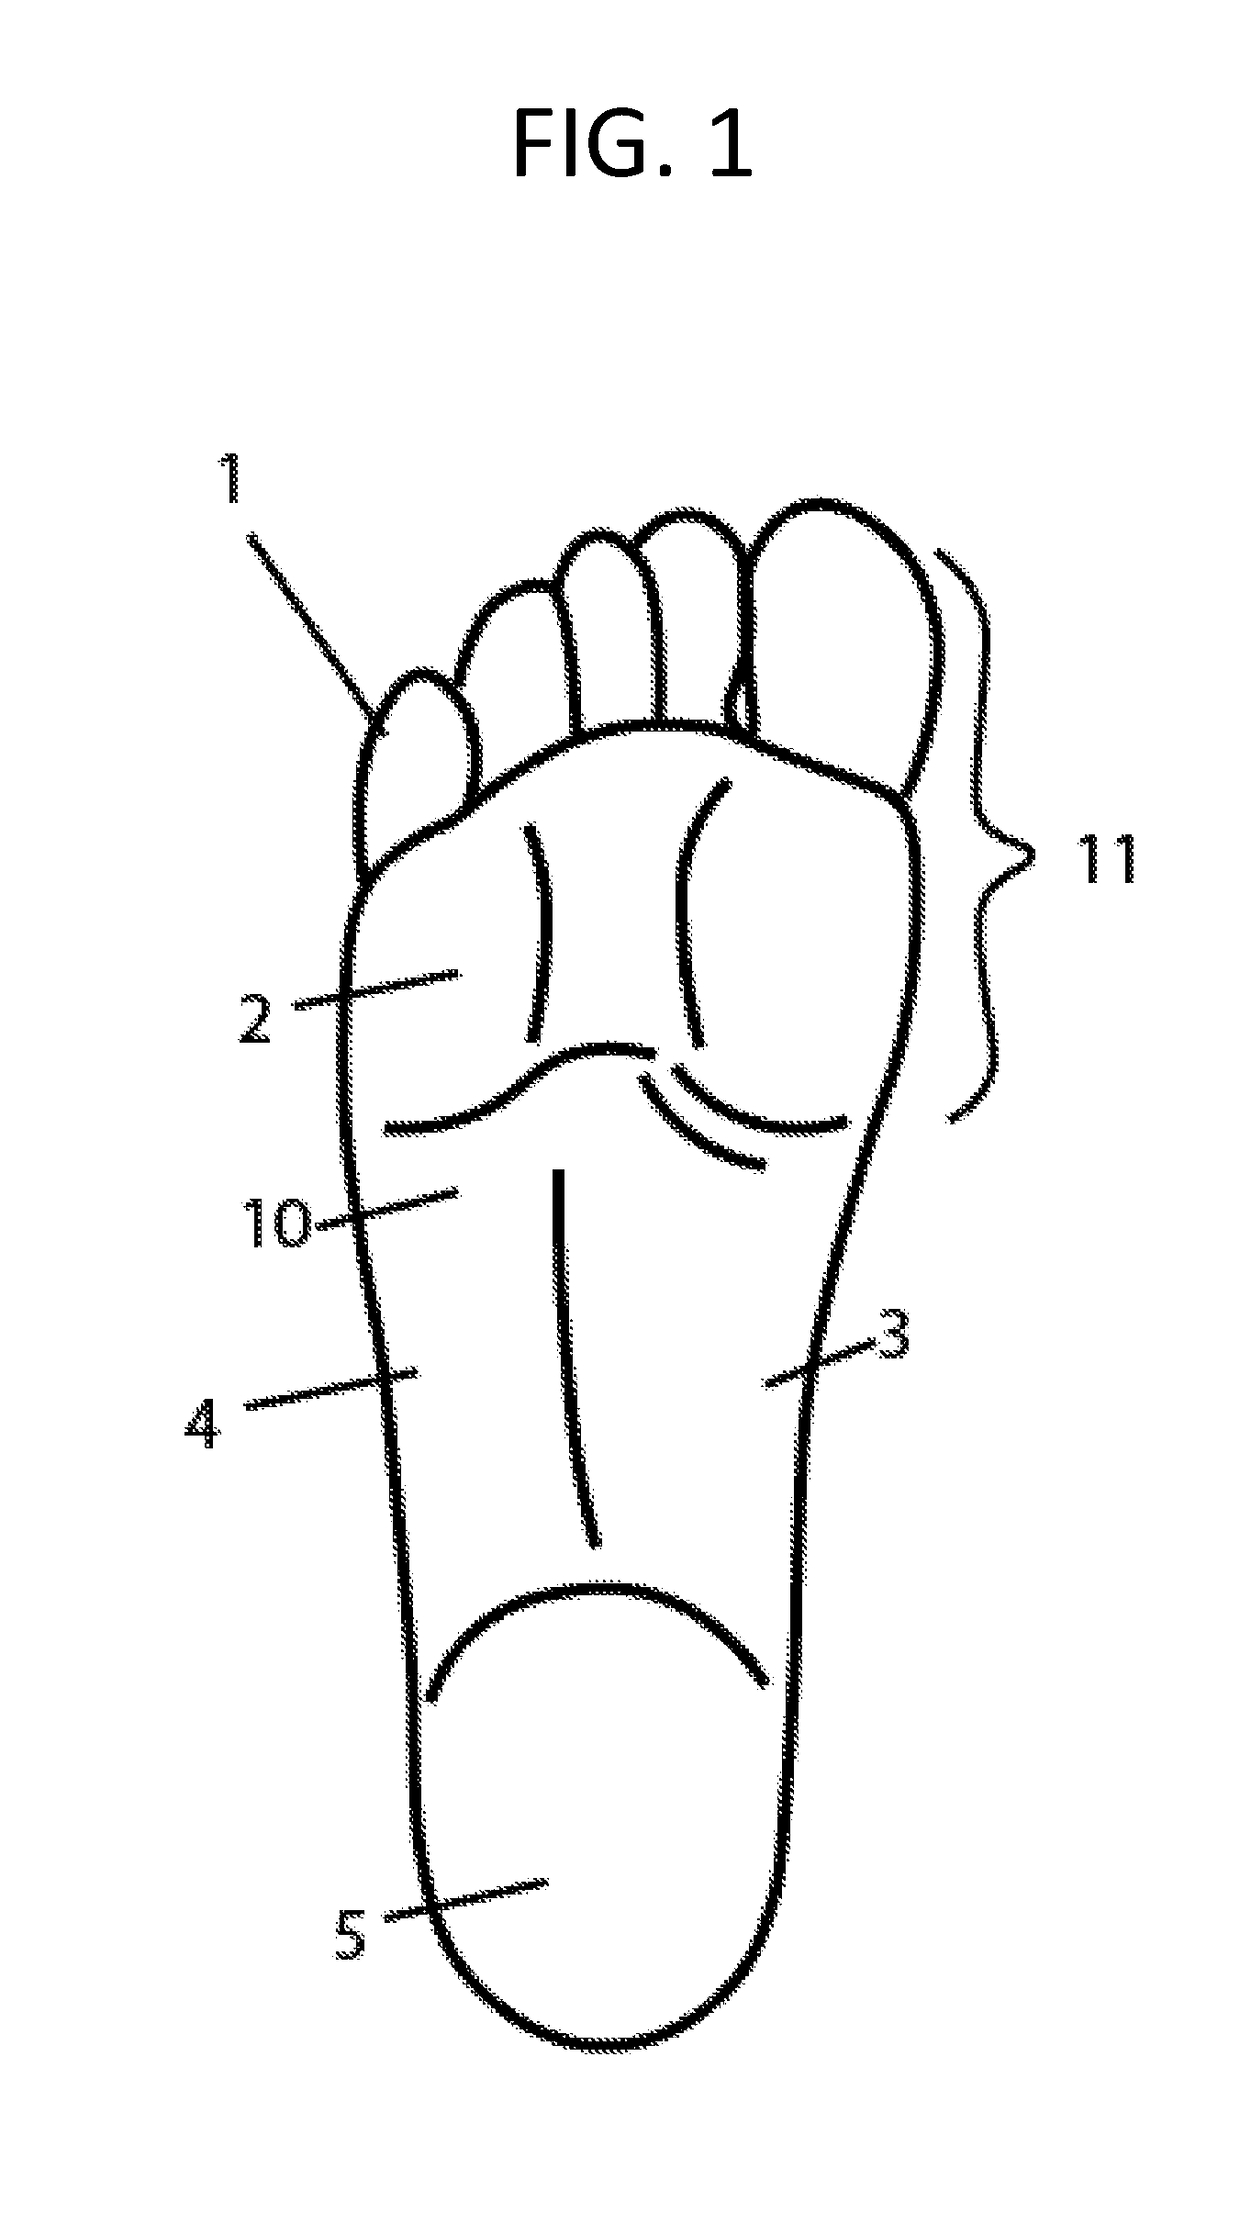 Modified Shoe Permitting Forefoot Extension For Natural Supination and Pronation